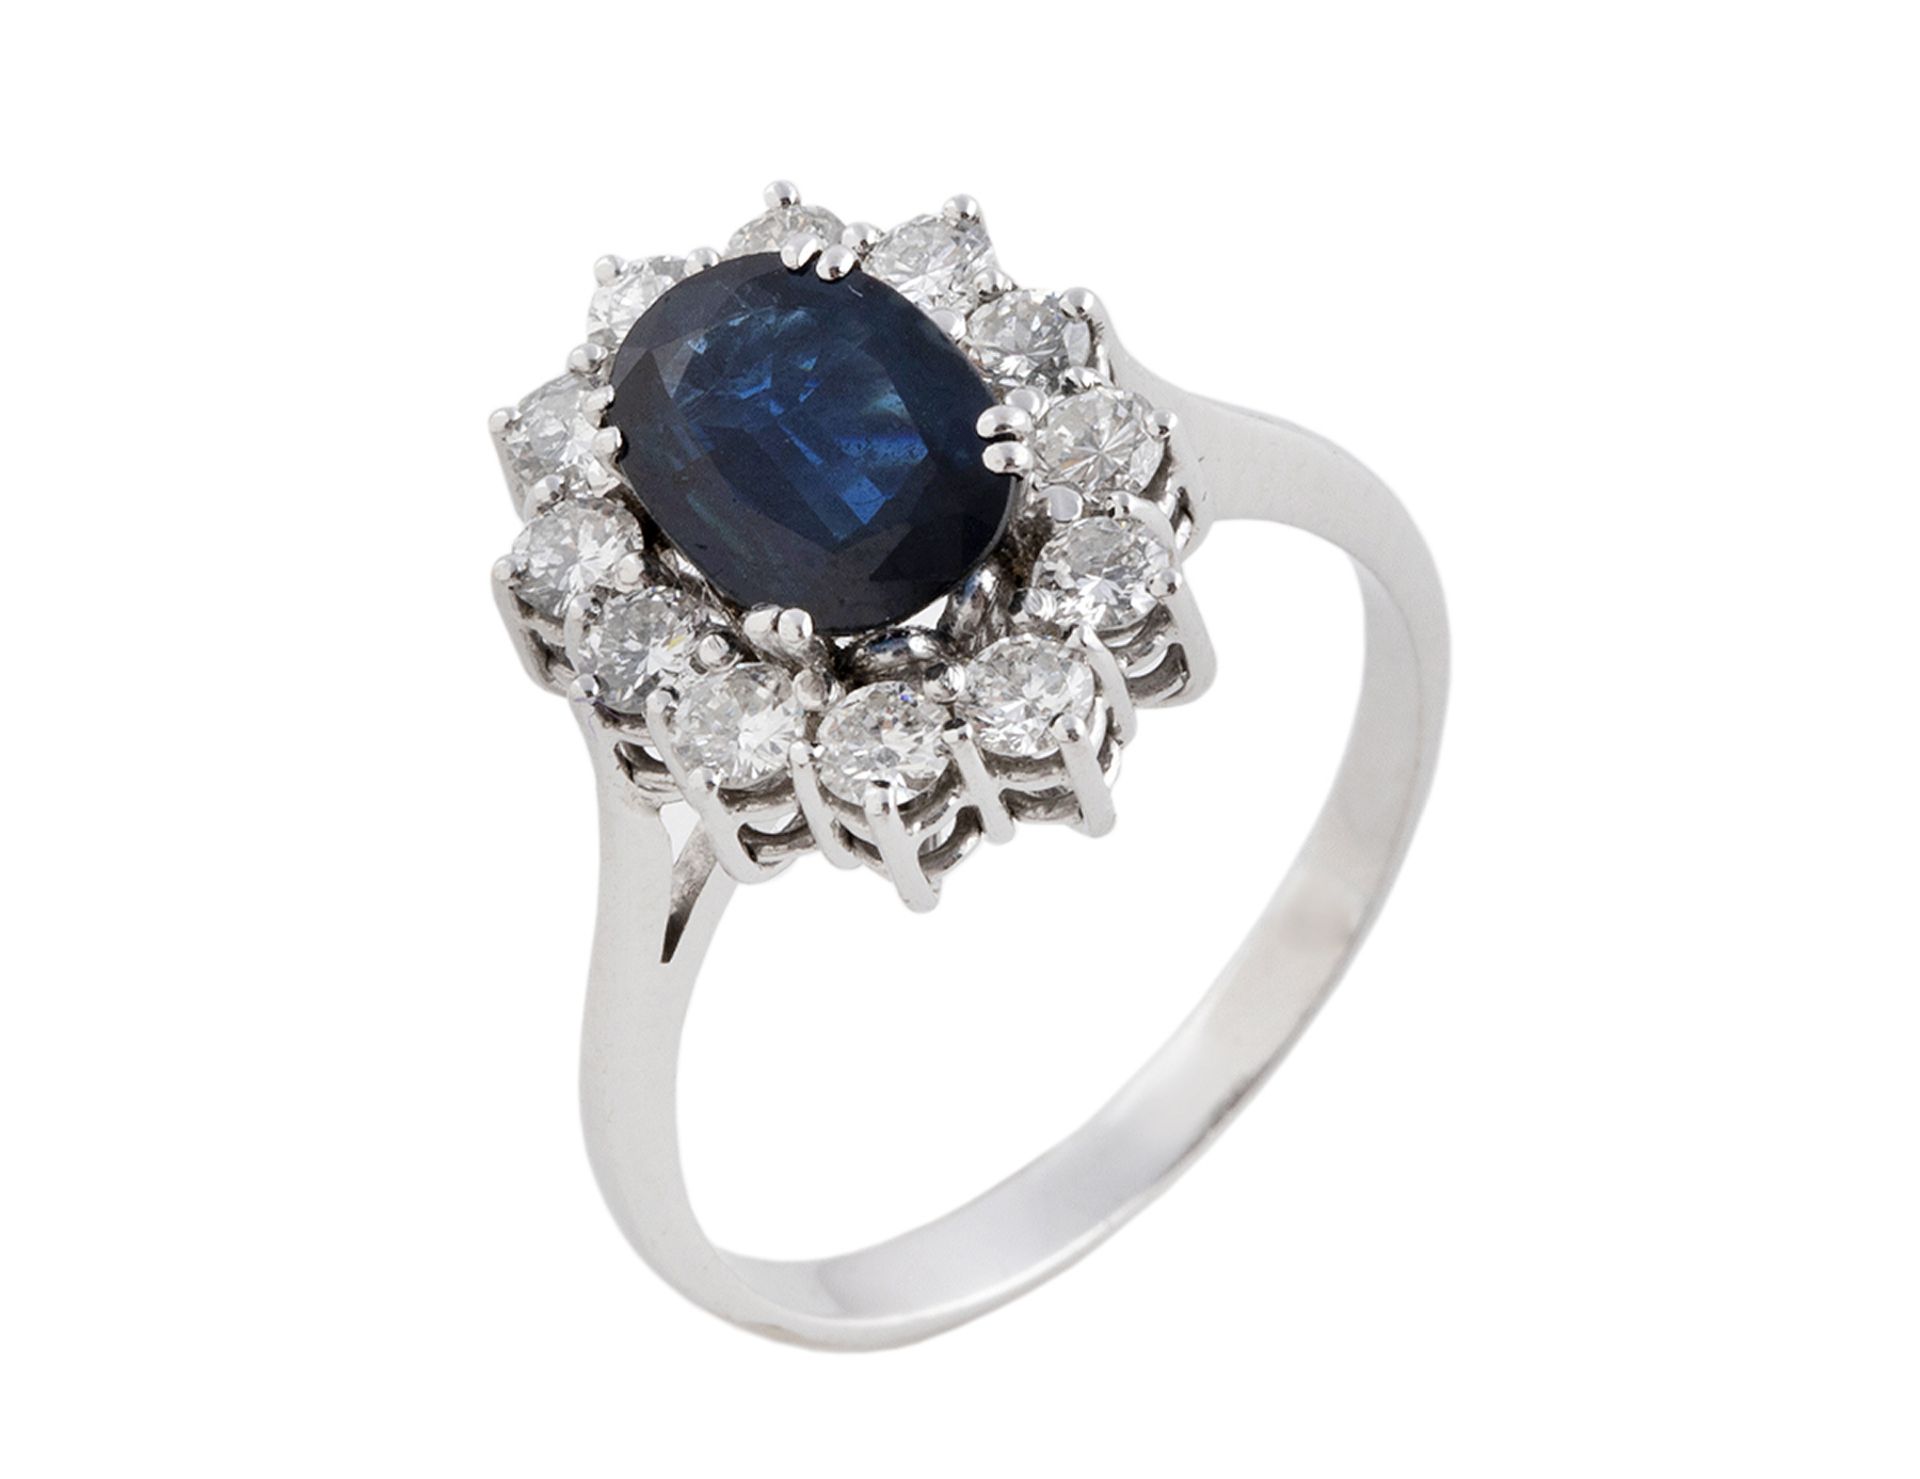 Ring with important 8 x 6 mm central sapphire and 12 modern cut diamonds of 1.10 ct - Image 2 of 3